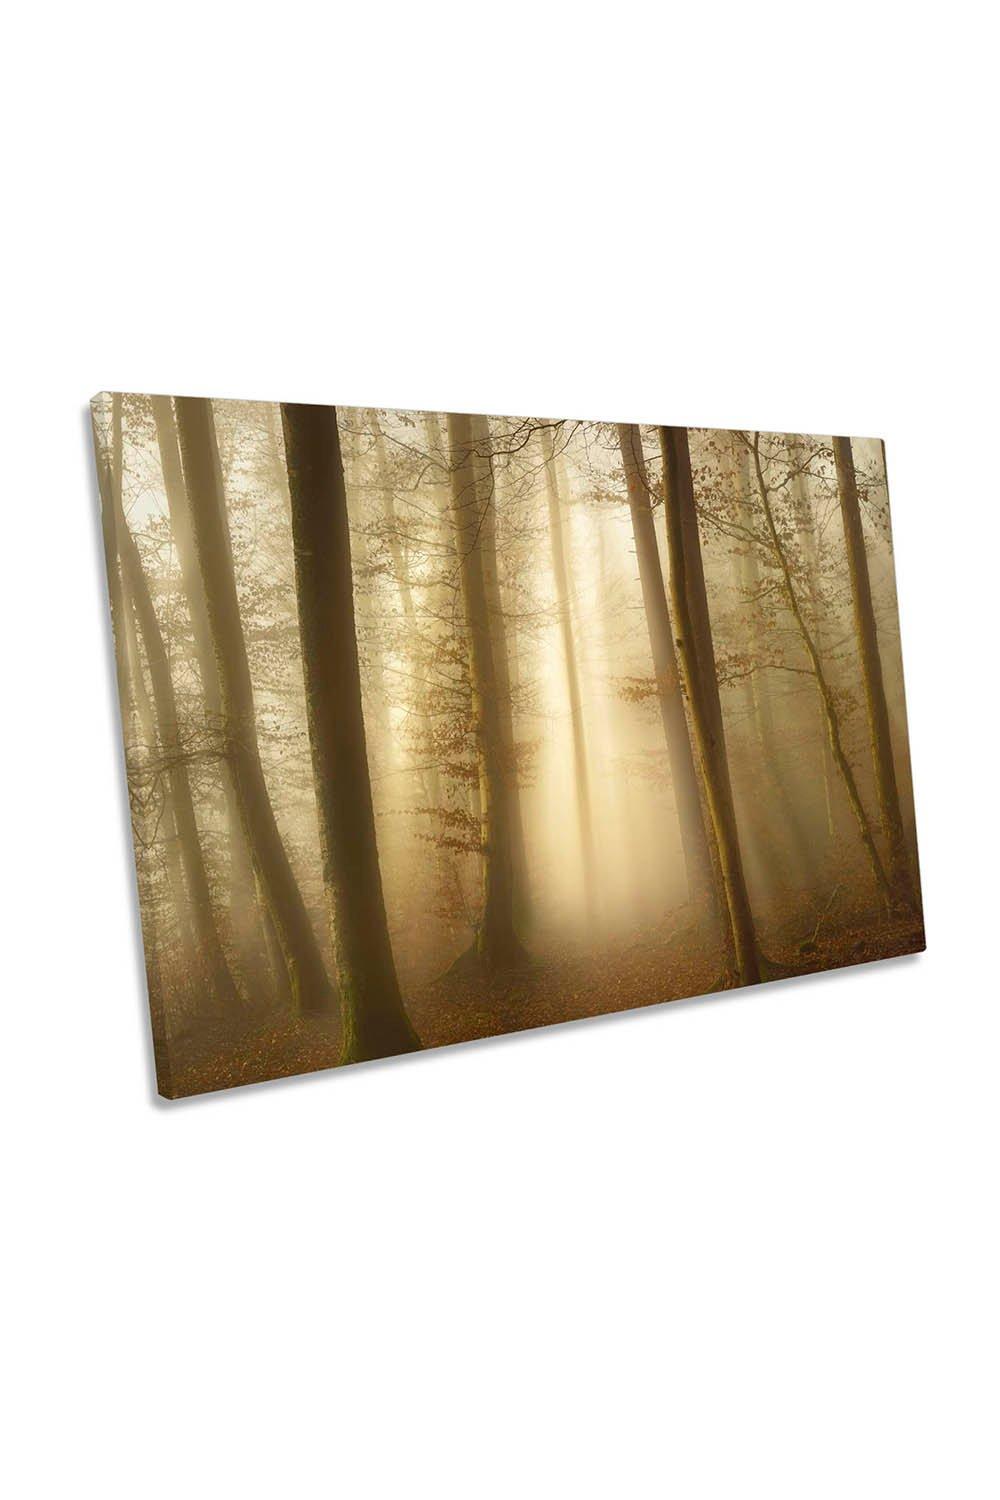 Into the Trees Misty Forest Morning Canvas Wall Art Picture Print